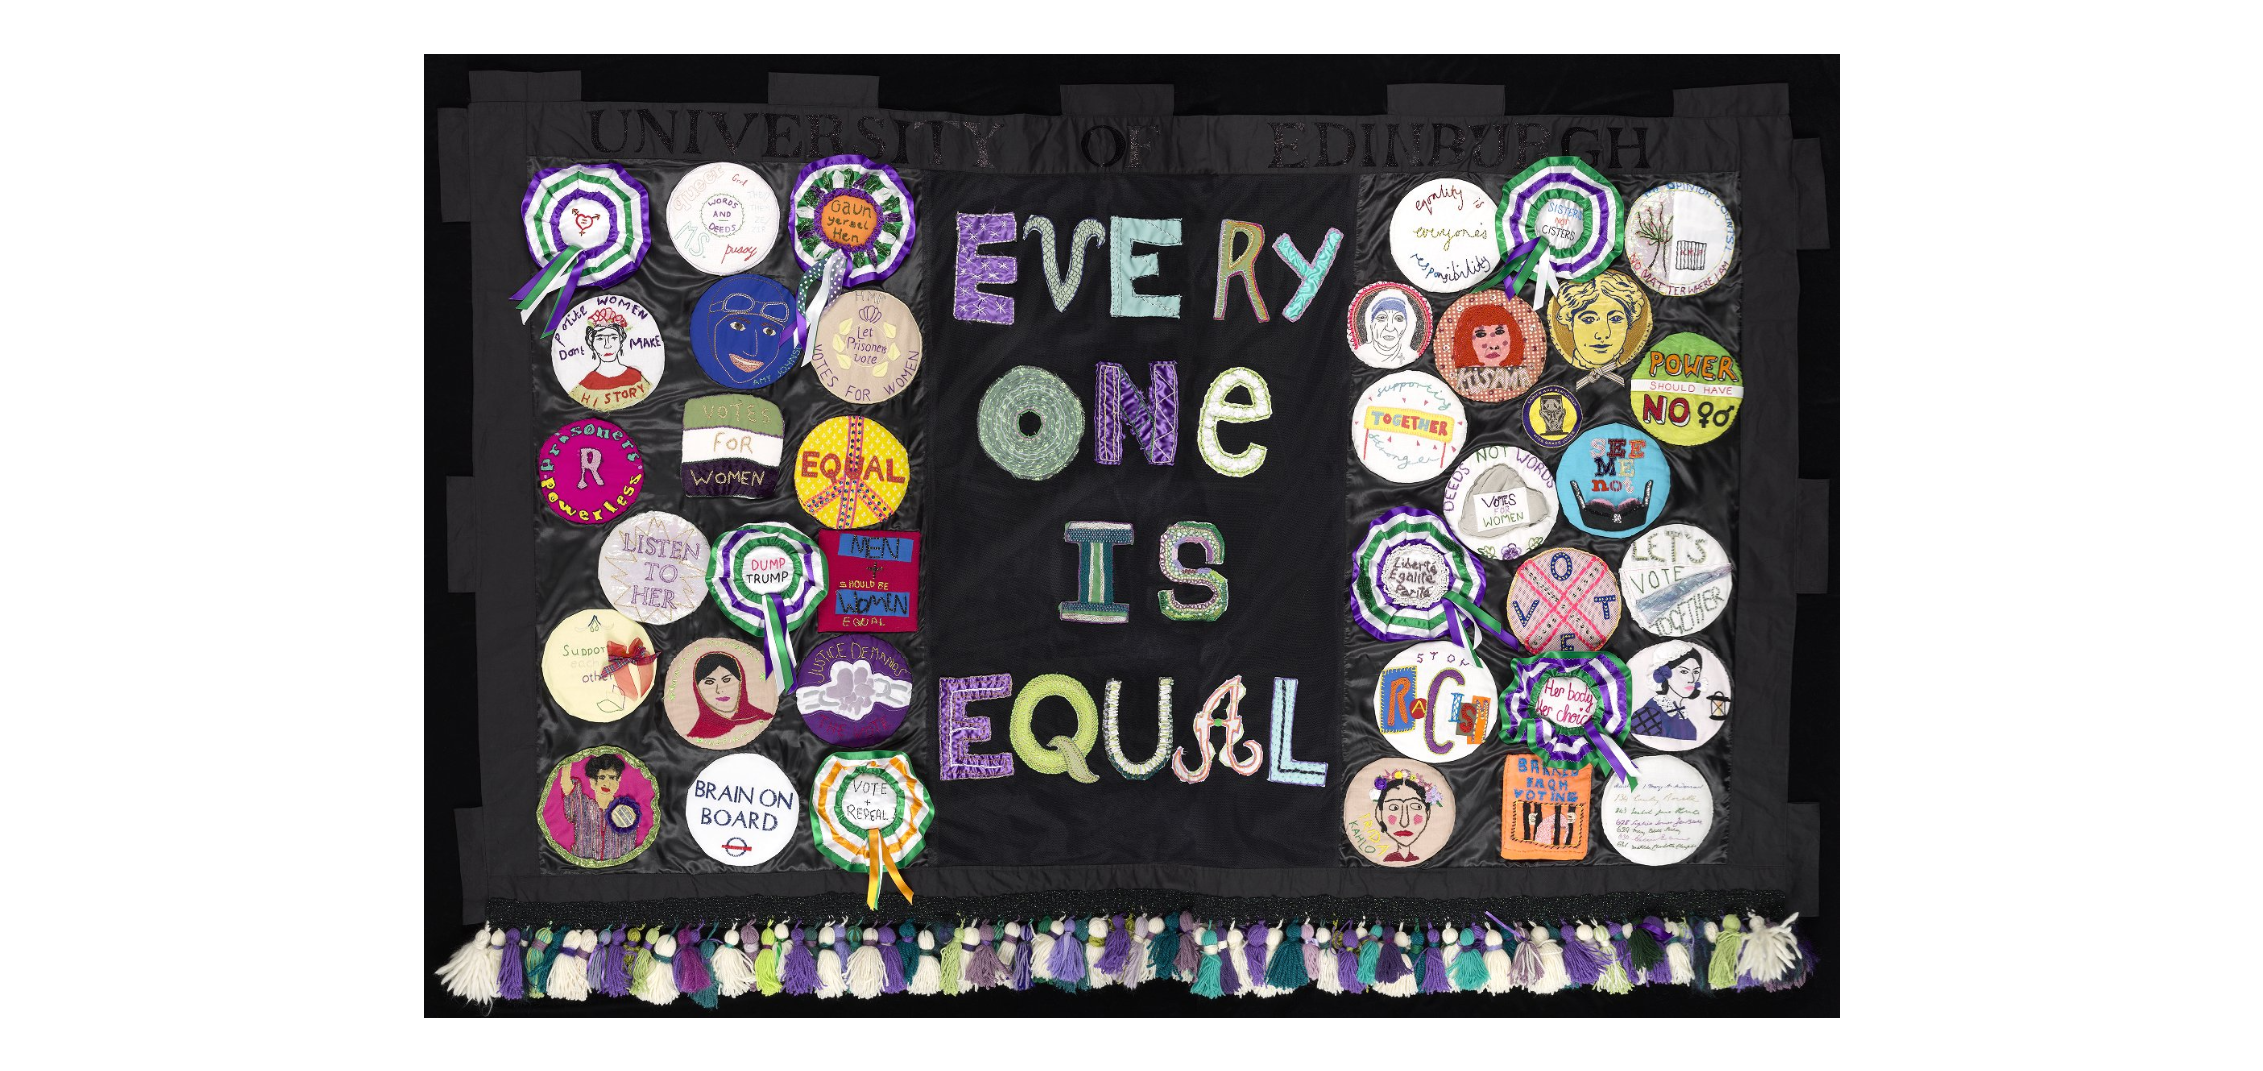 A black fabric banner with the words 'Every one is Equal' written down the centre with one word on each line. To either side of the words there are a number of fabric badges representing different messages about equality.